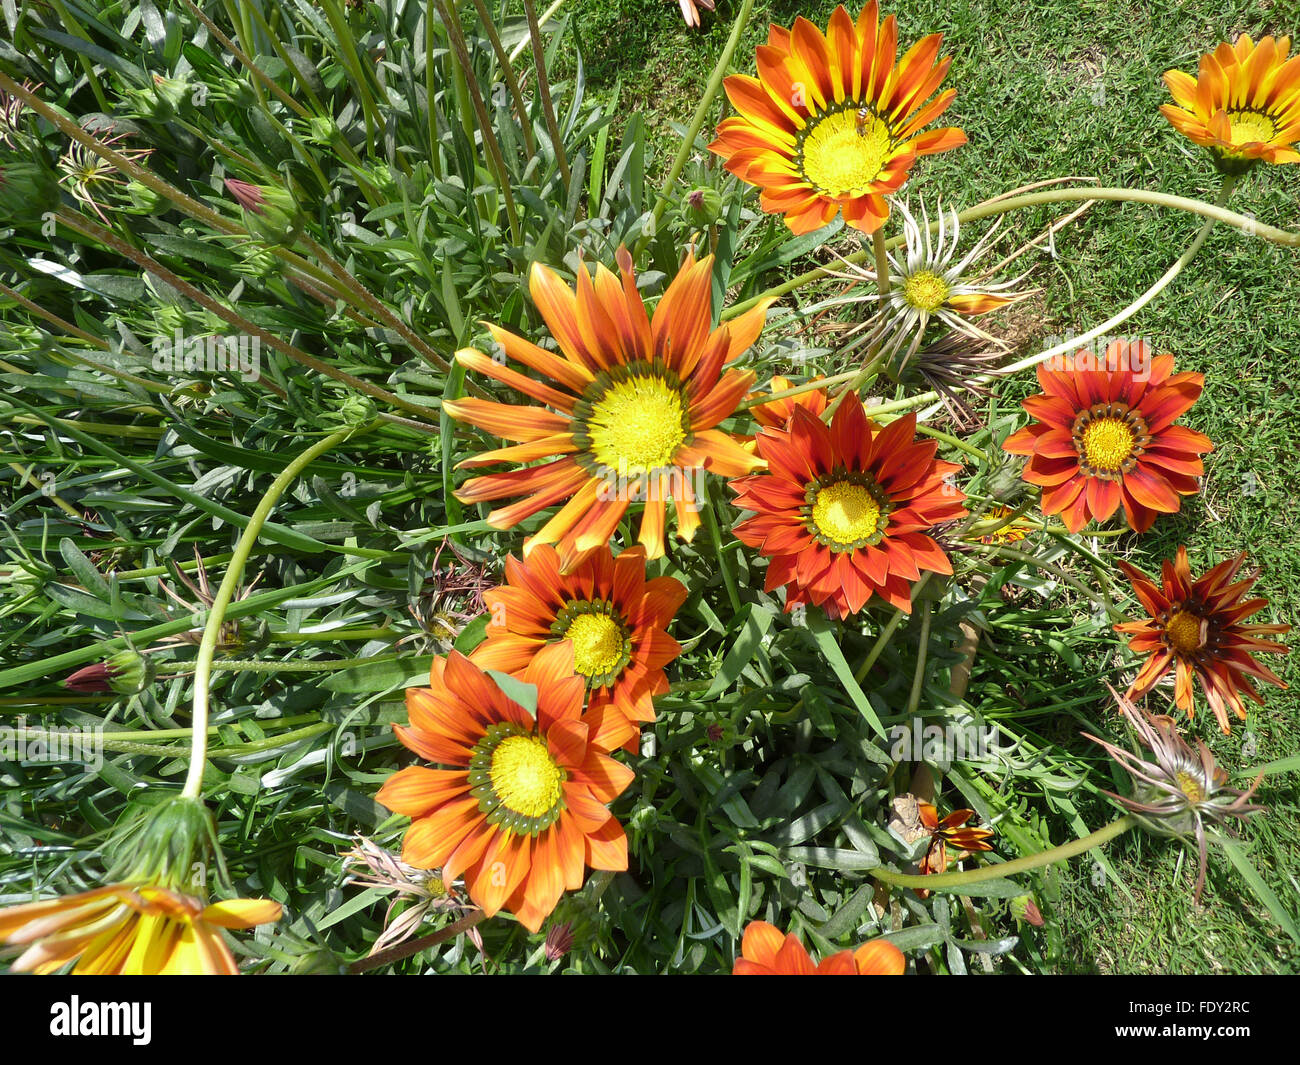 Gazania ringens, Garden ornamental perennial herb with linear leaves and orange red flower heads, variously coloured cultivars Stock Photo